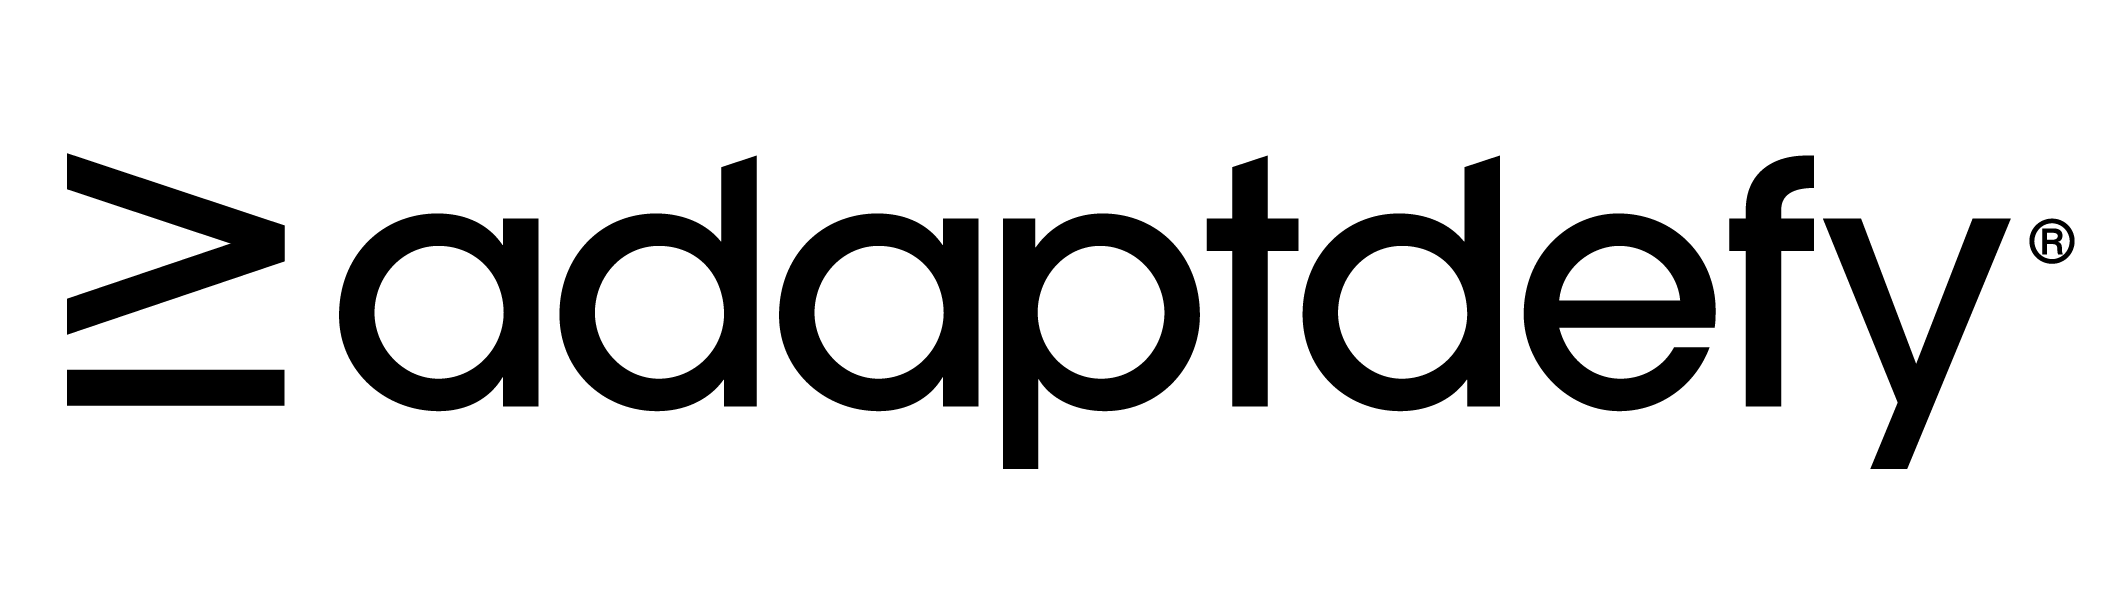 Logo starting with the greater than or equal sign followed by the name adaptdefy, all in black and white